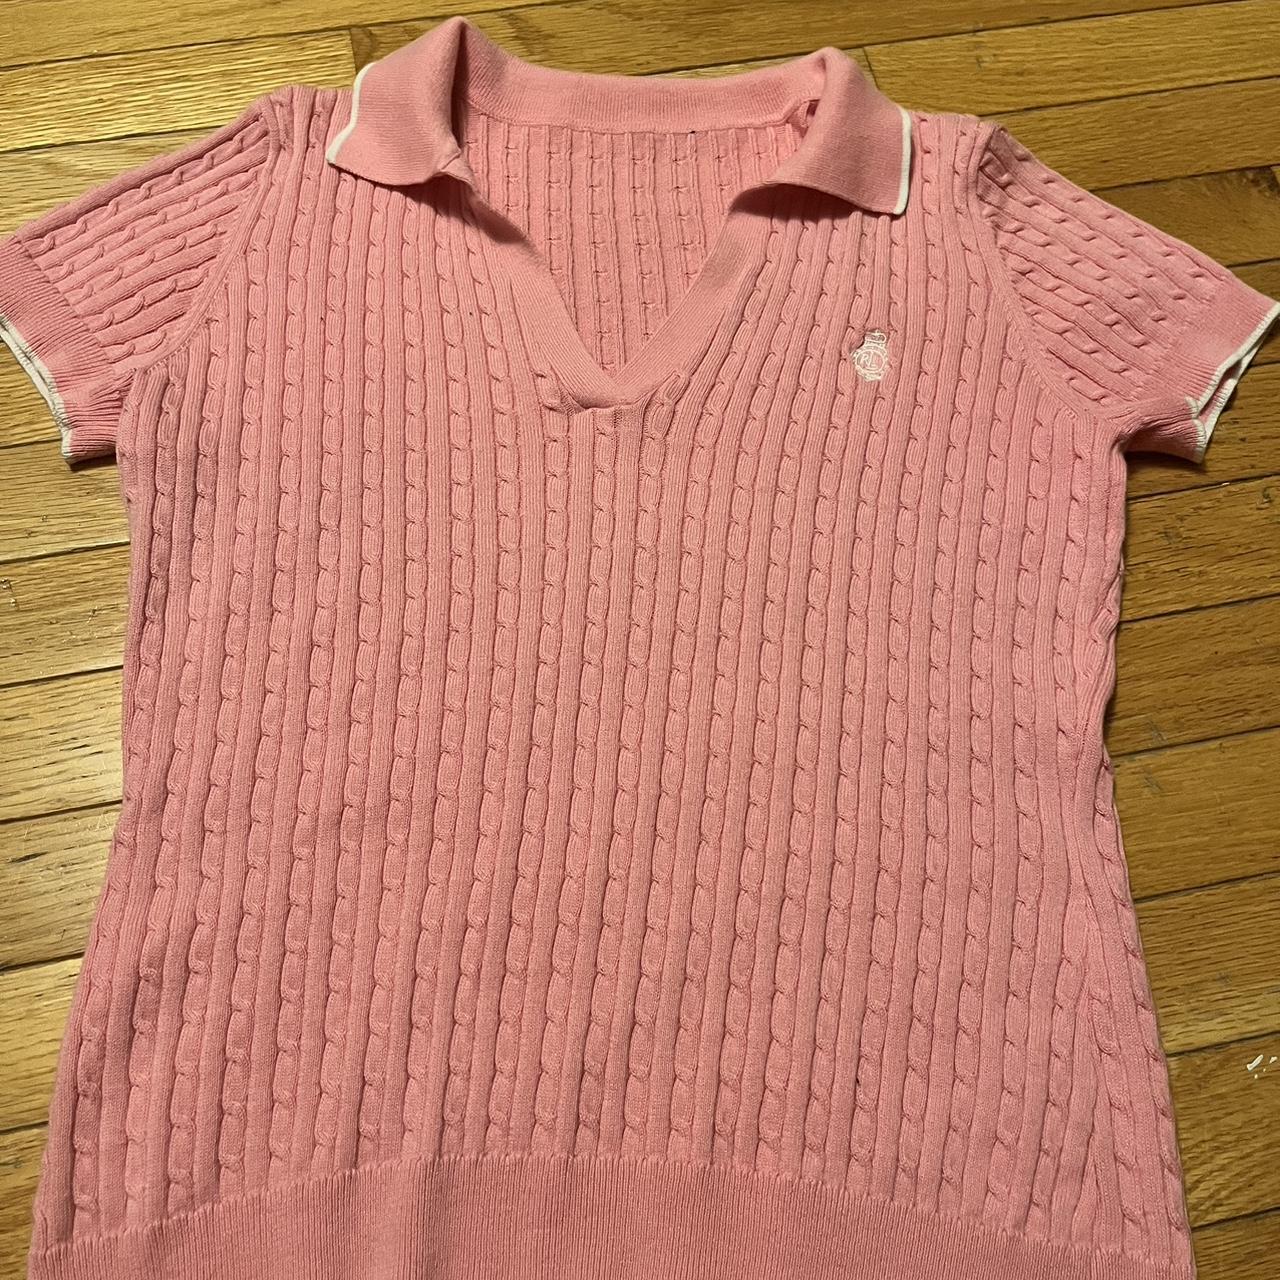 Polo Ralph Lauren Women's Pink and White Polo-shirts | Depop